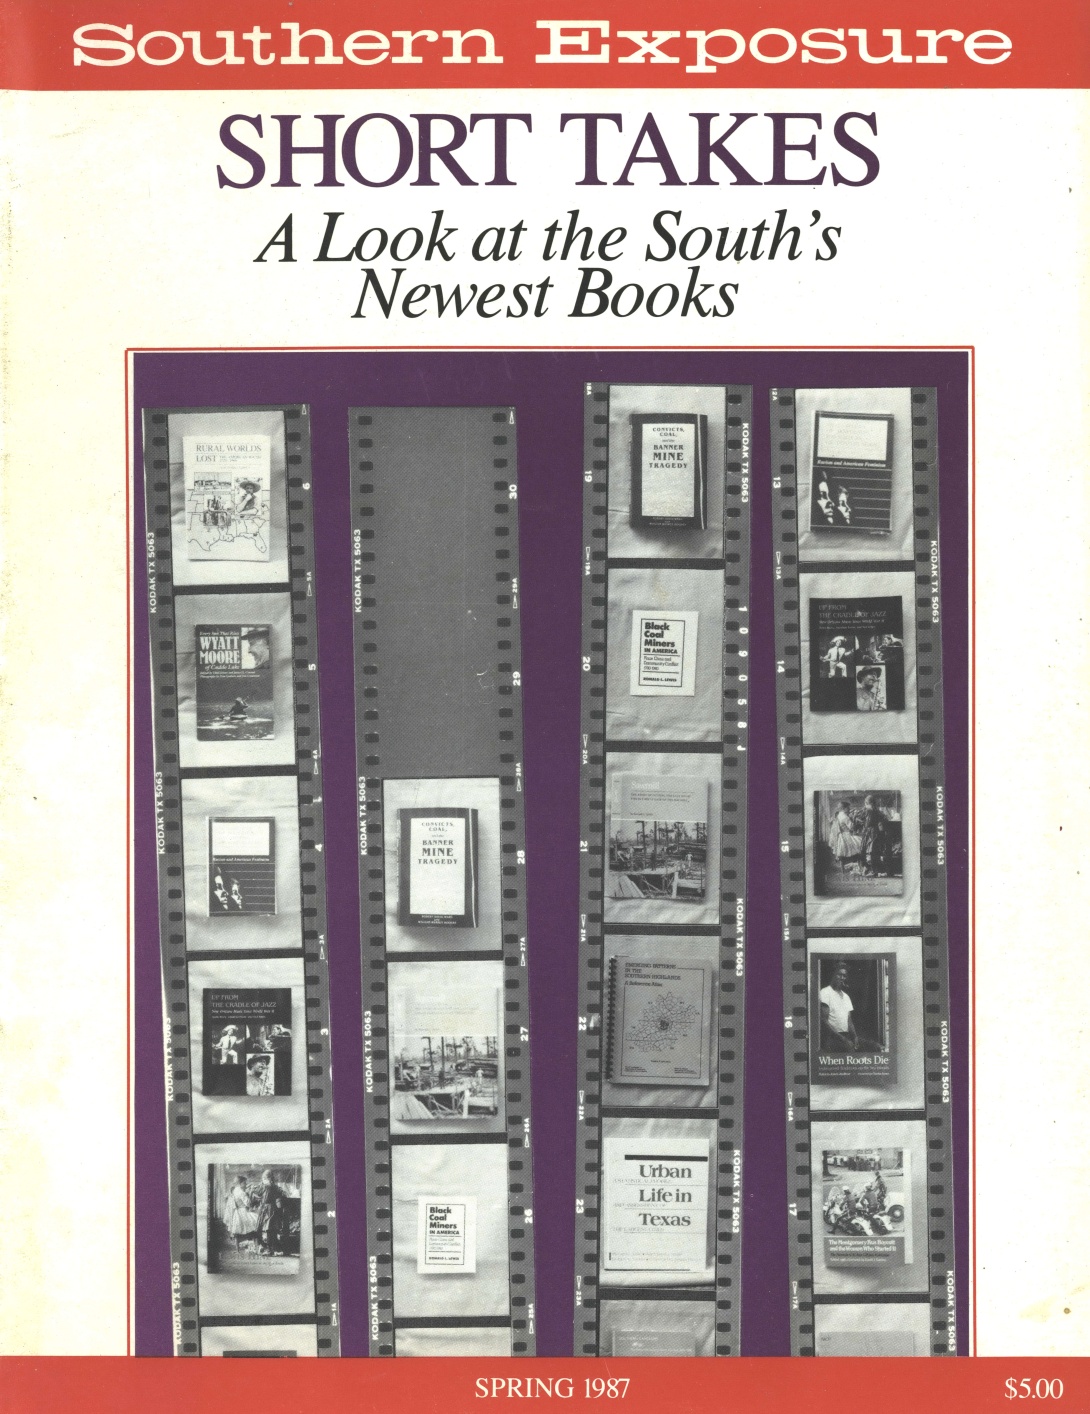 Magaziner cover with photos of film negatives and text reading "Short Takes: A Look at the South's Newest Books"